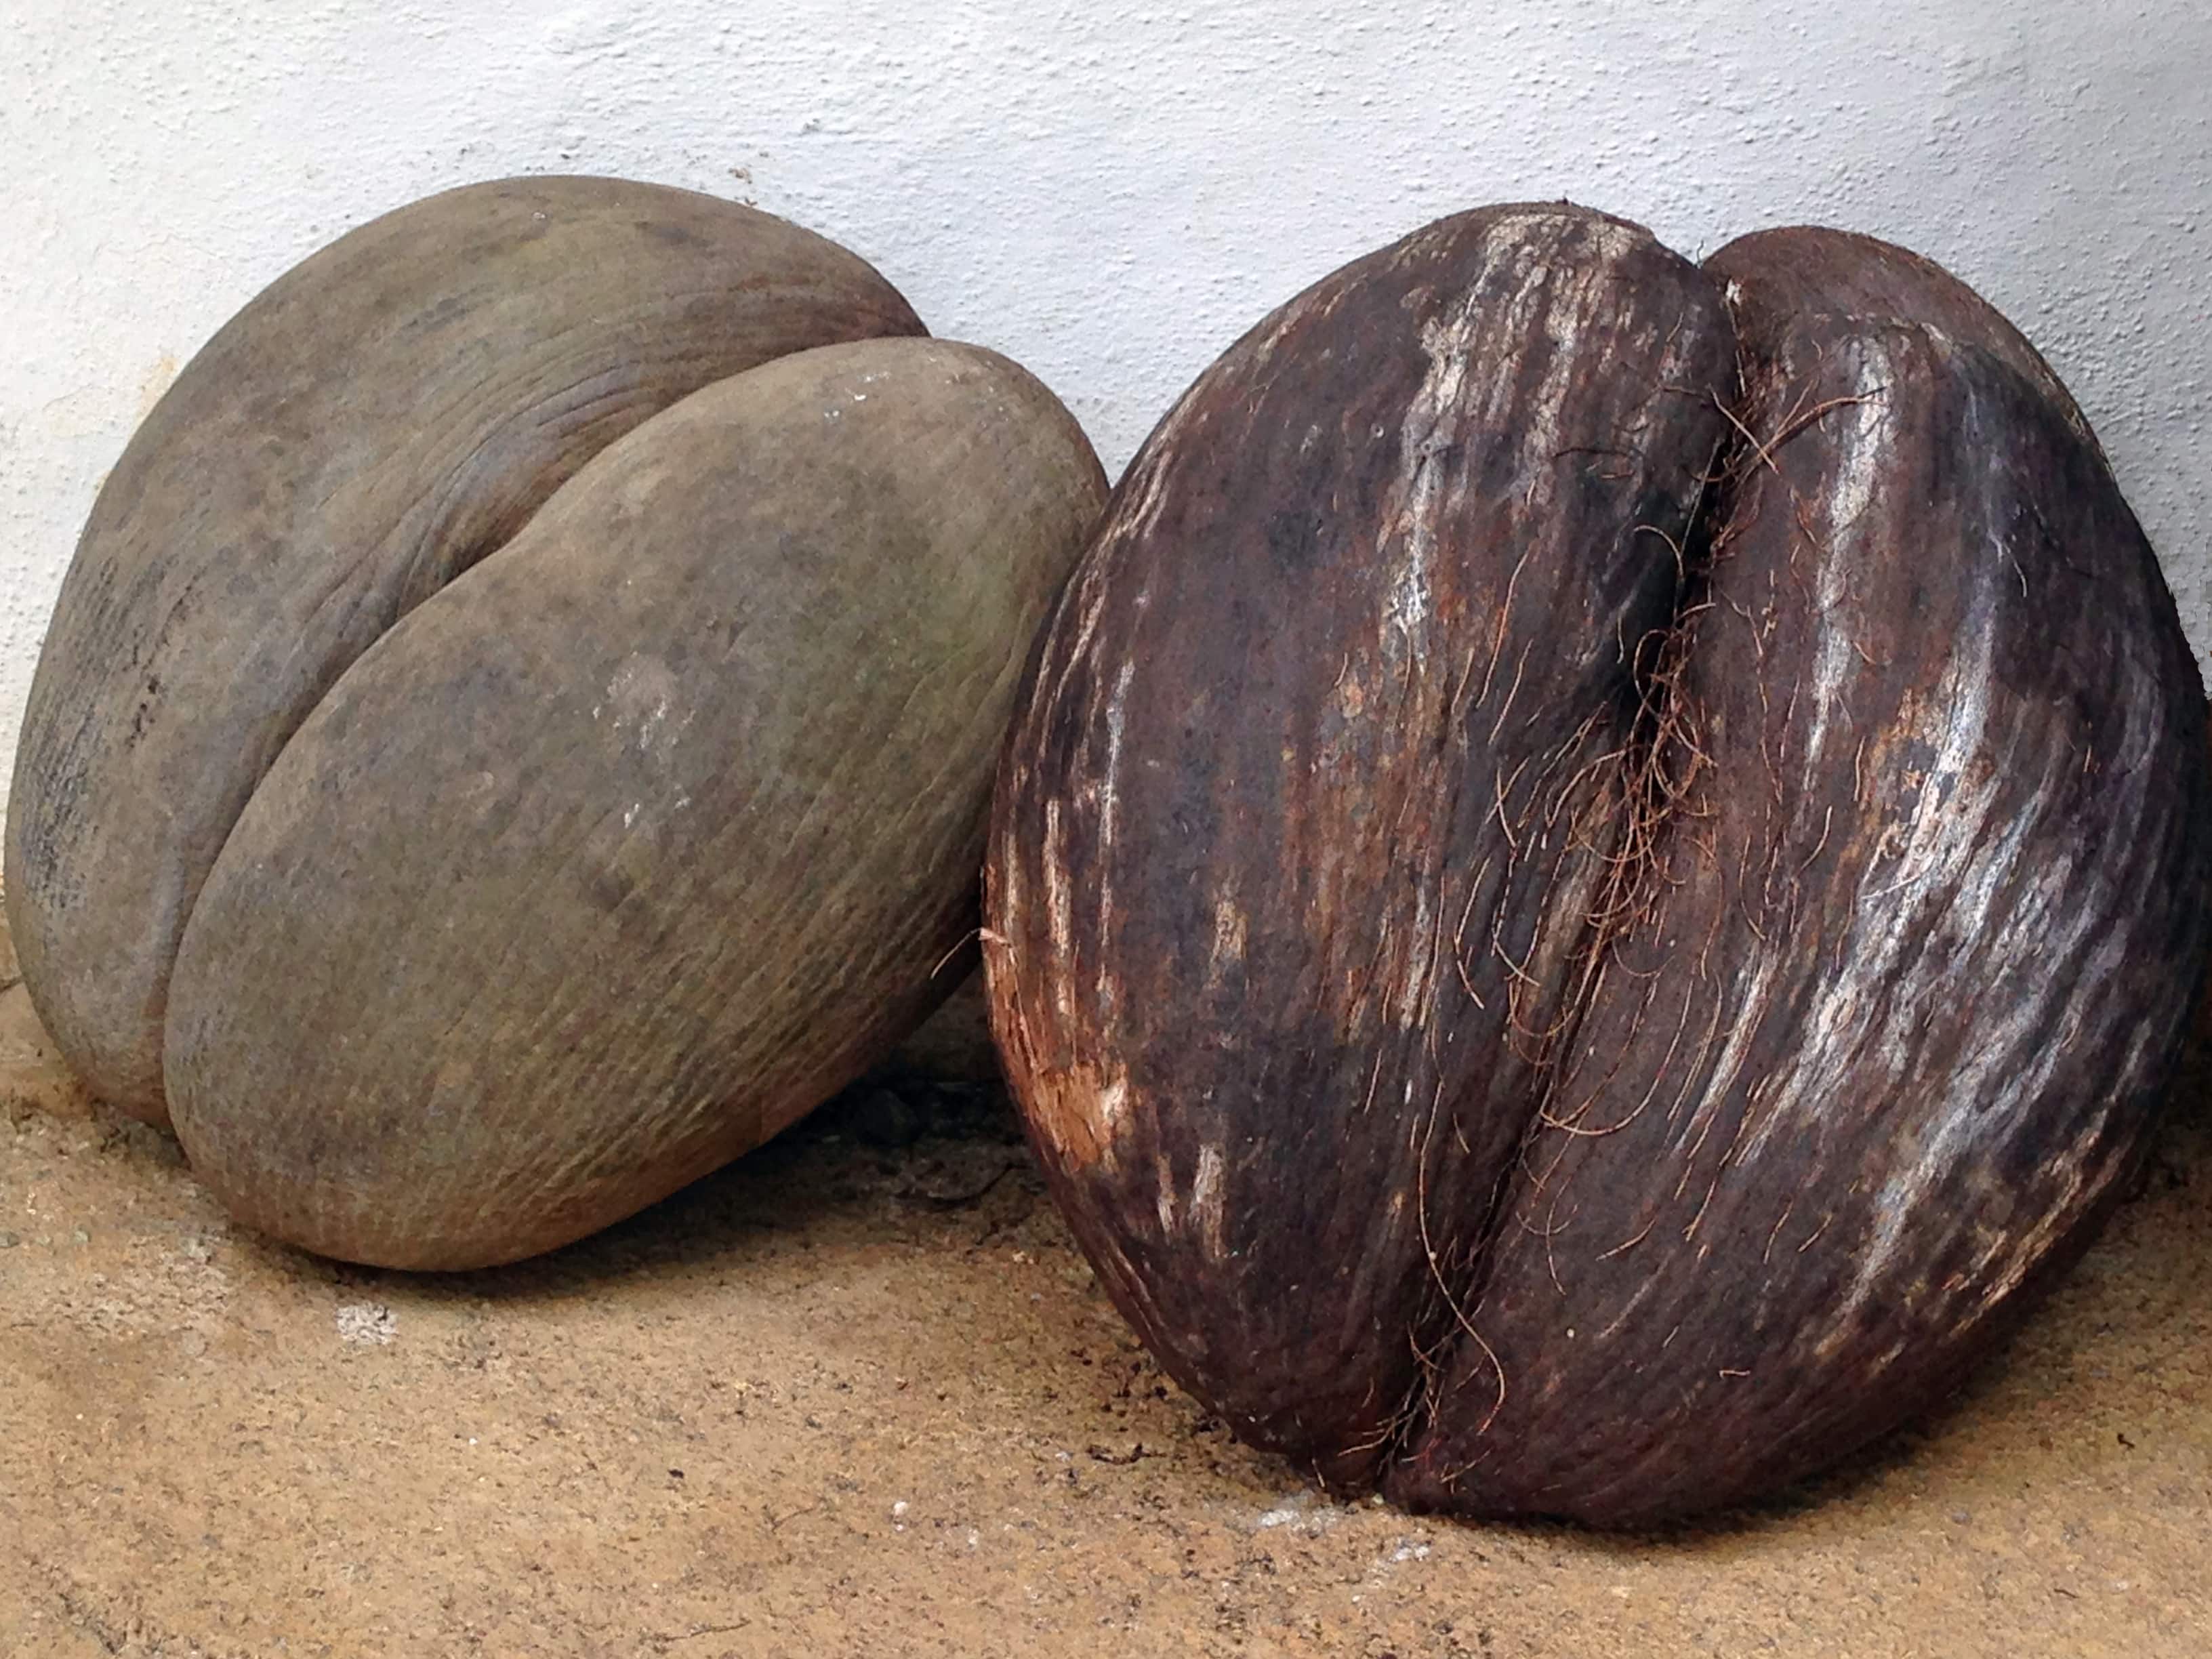 The famed coco de mer- with husk (R), and without husk (L)